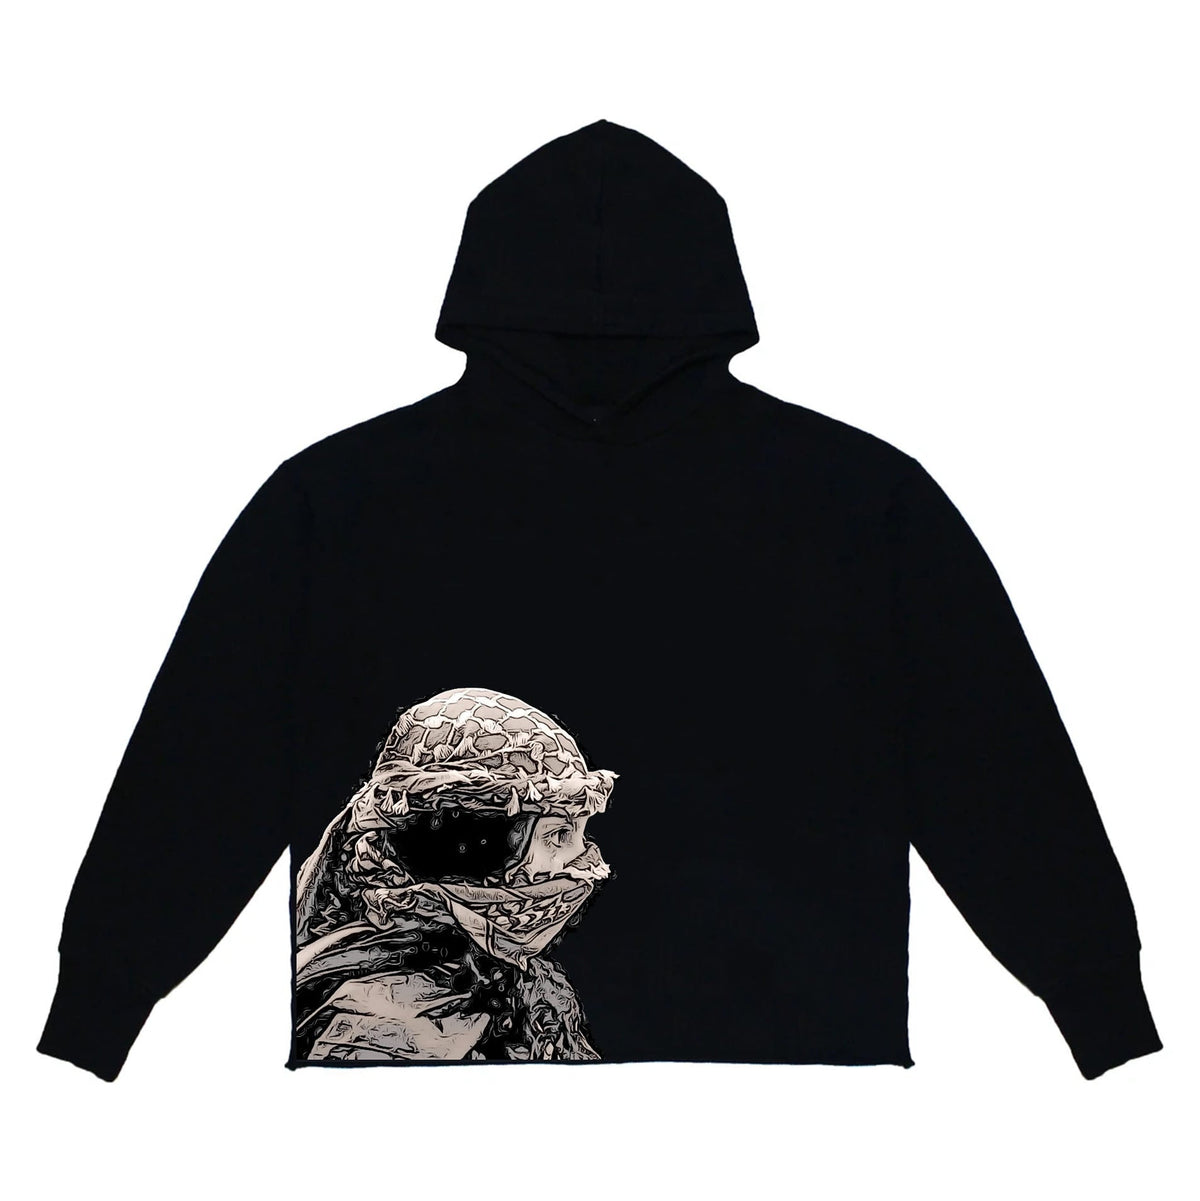 Freedom Fighter - Cropped Hoodie